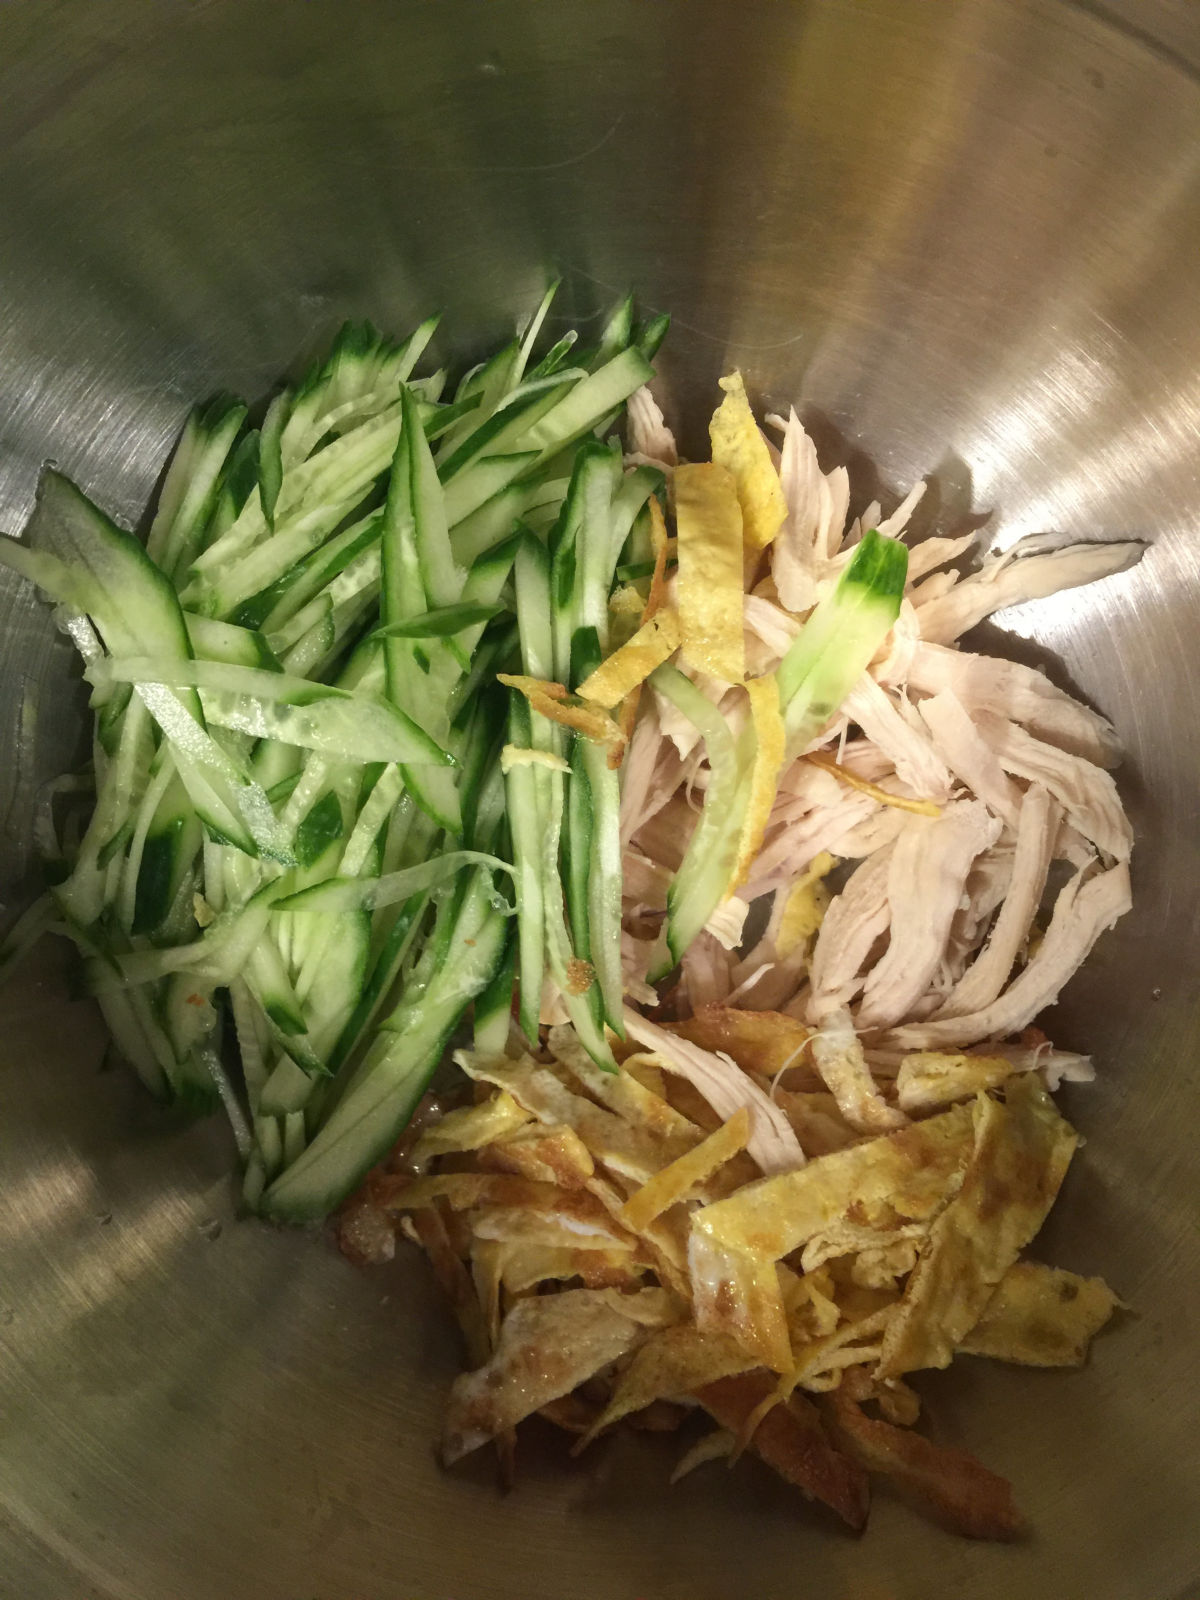 Overhead view of a large bowl with cucumber strips, shredded chicken breast, and egg strips.